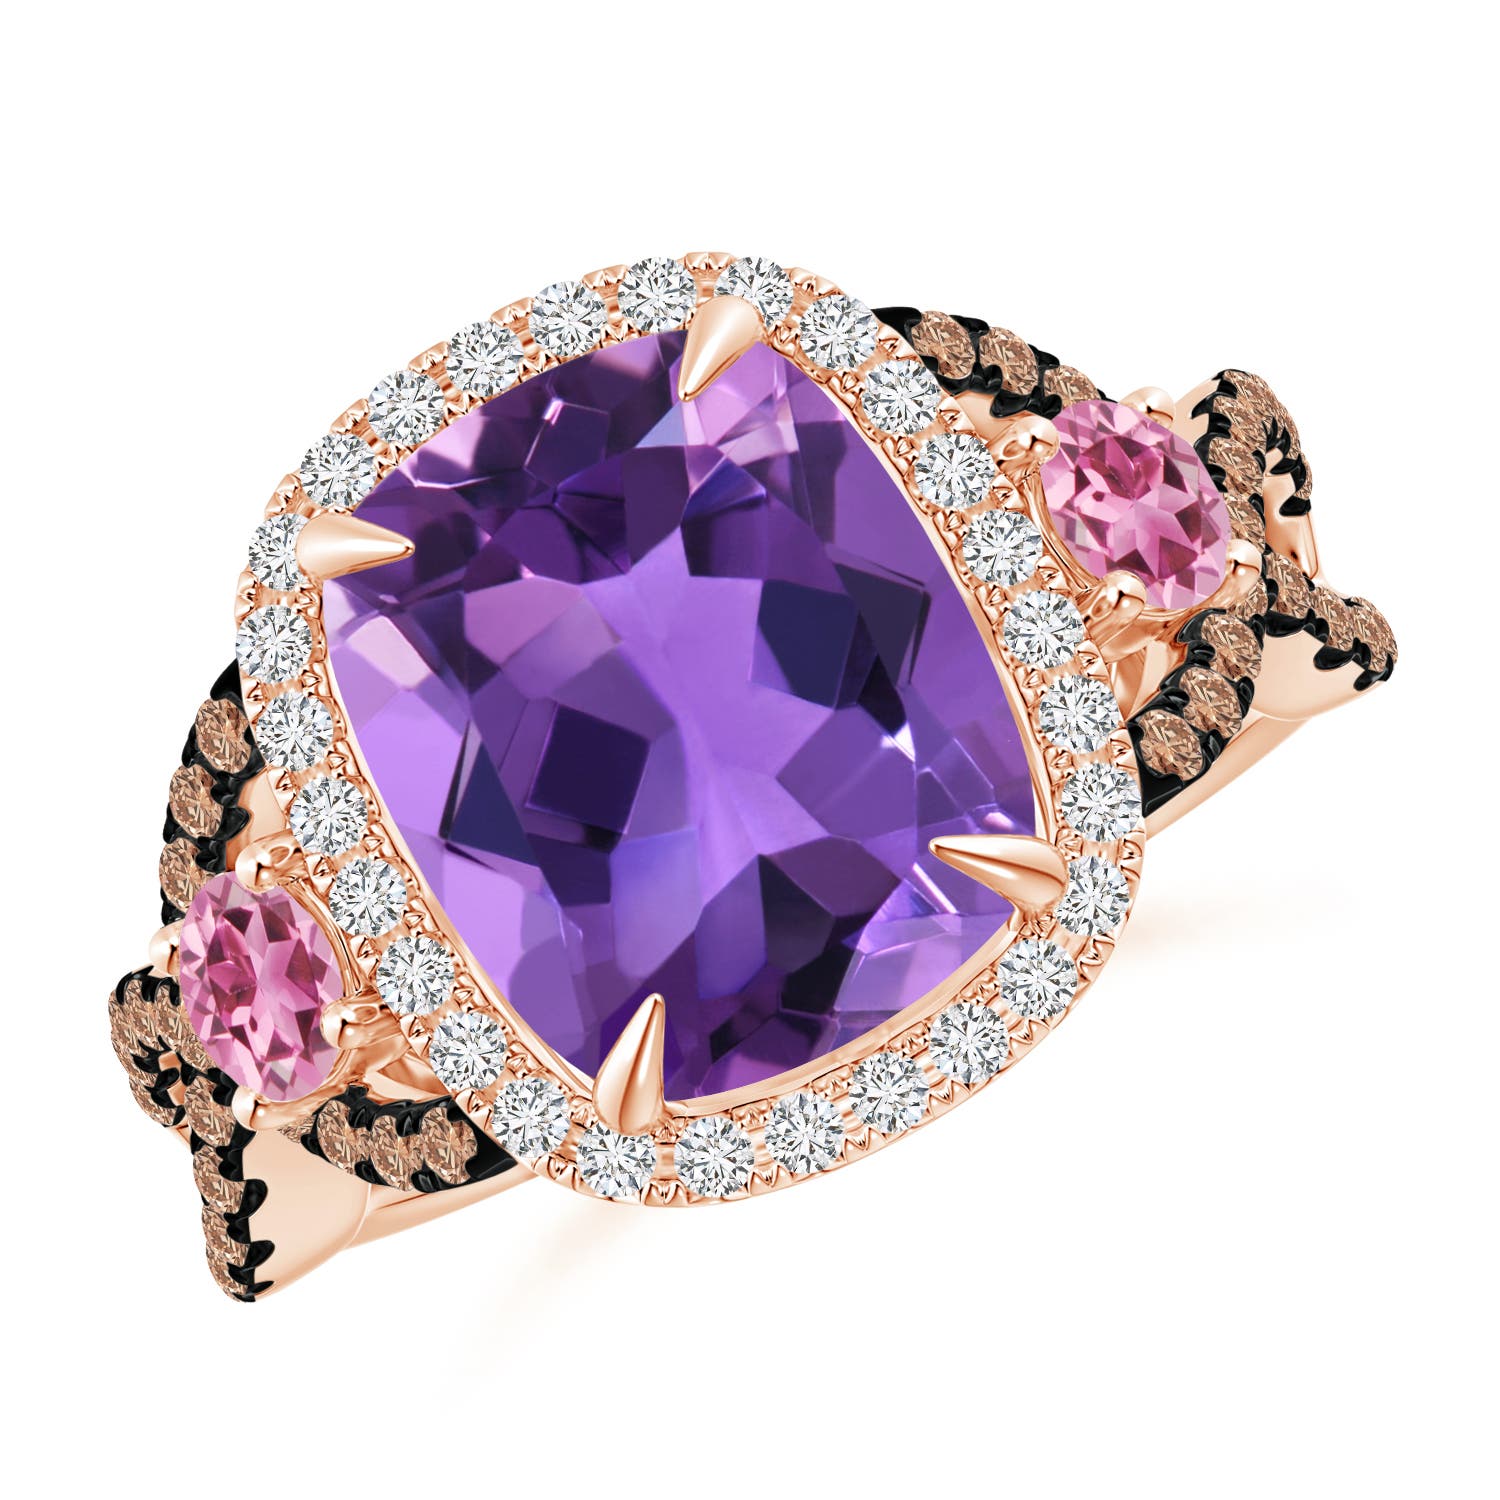 AAA - Amethyst / 4.4 CT / 14 KT Rose Gold